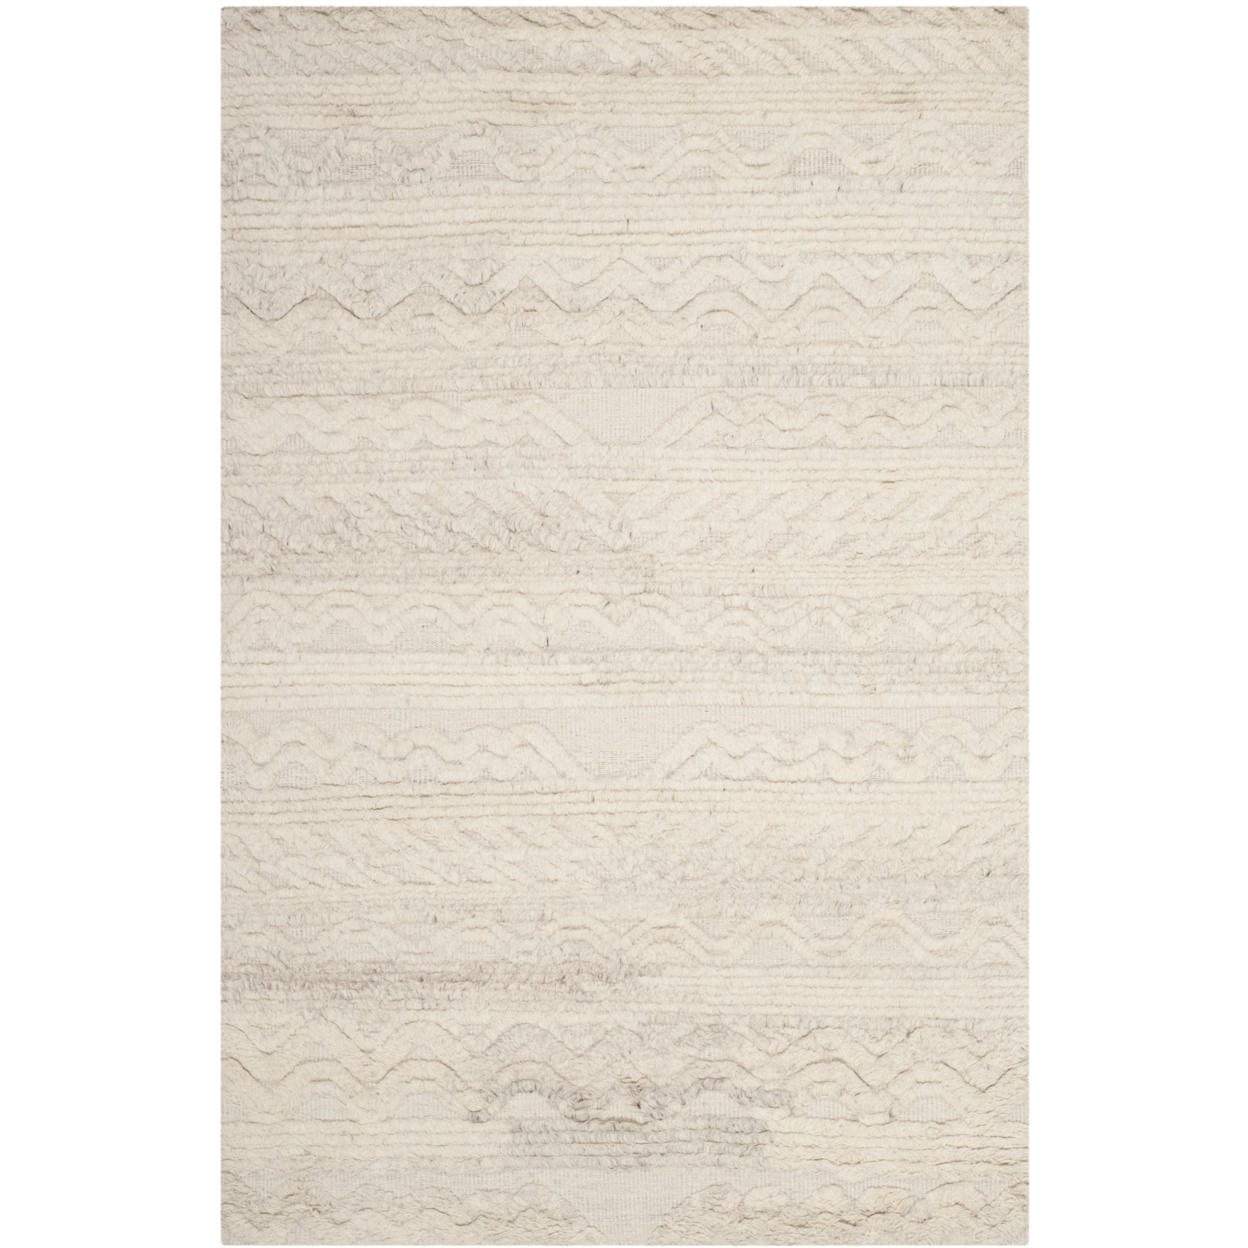 SAFAVIEH Kenya Collection KNY816A Hand-knotted Ivory Rug - 8' X 10'